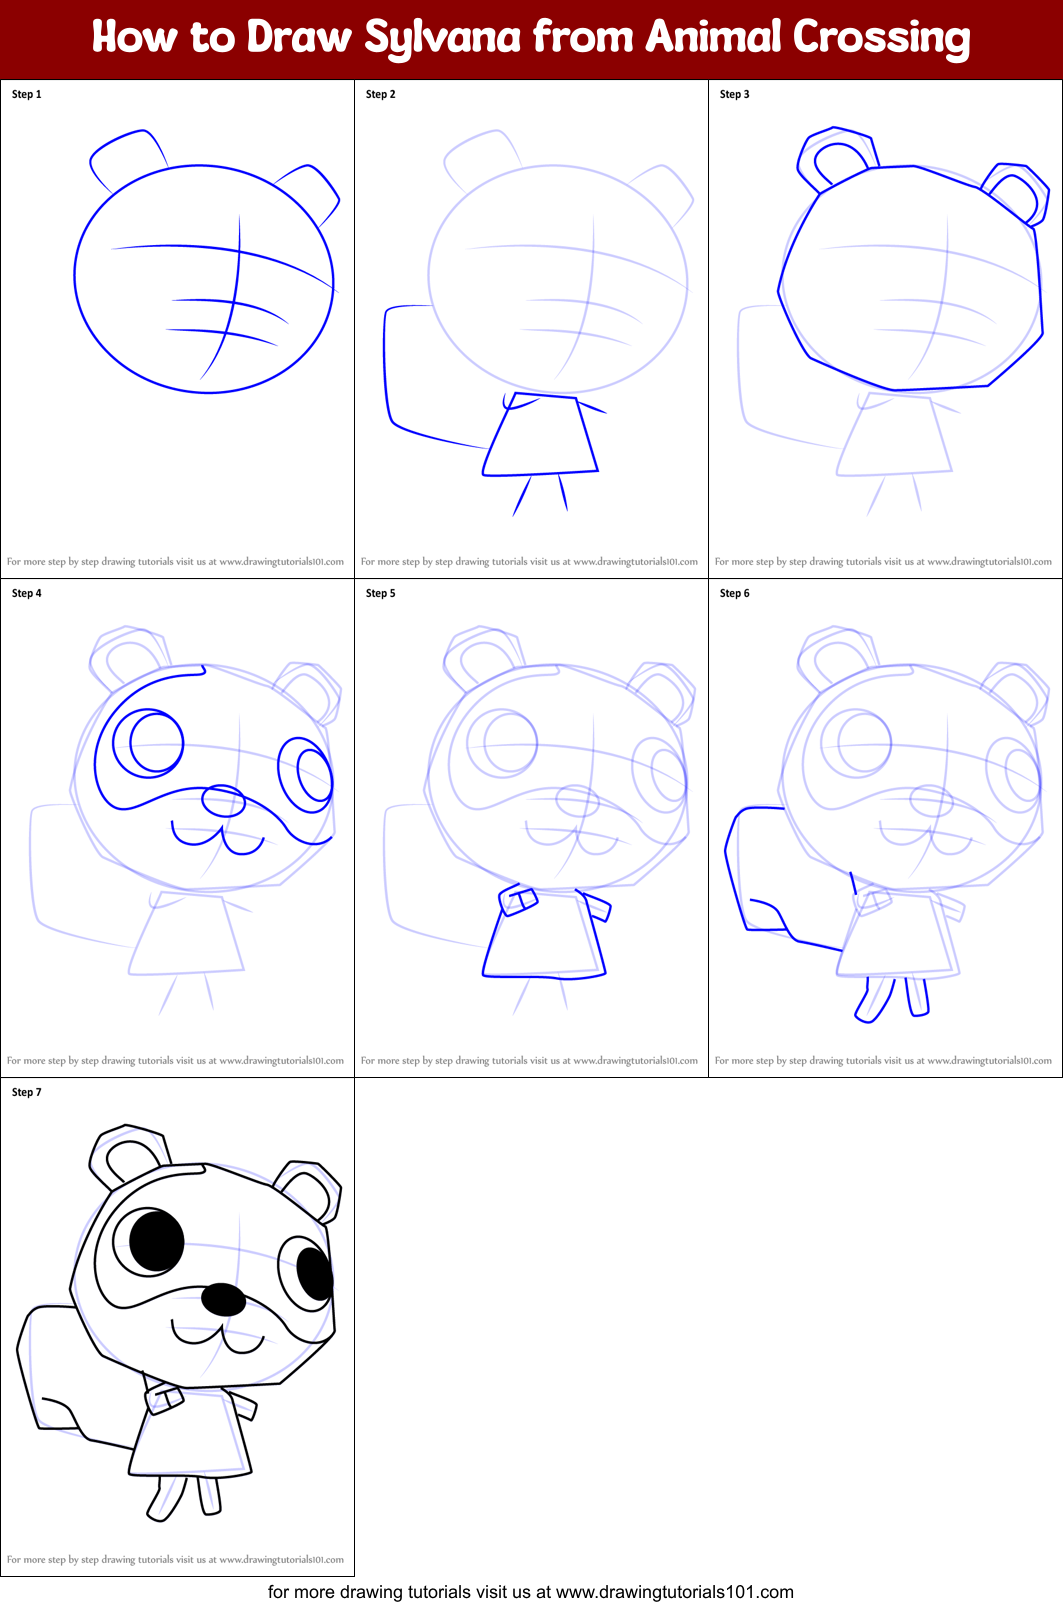 How to Draw Sylvana from Animal Crossing printable step by step drawing